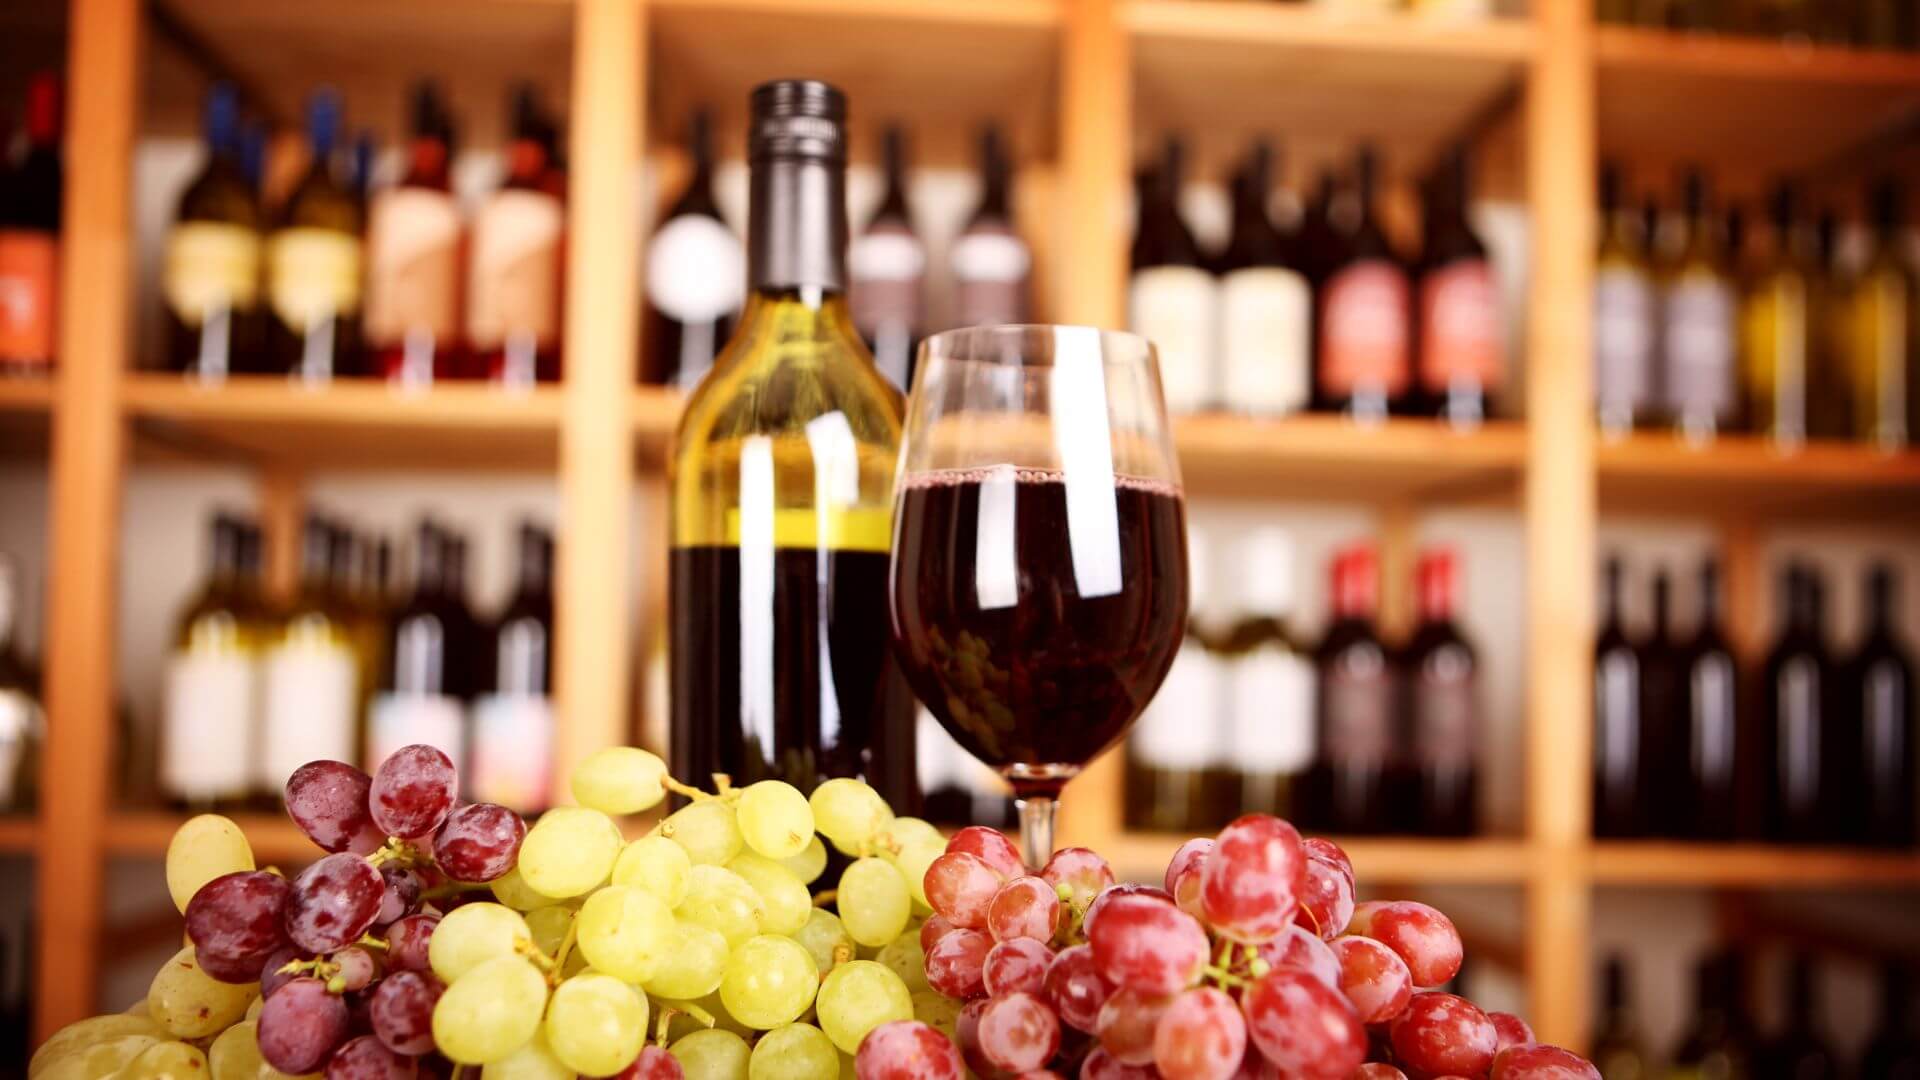 Background of wine on shelves with bottle and goblet of wine and grape bunches in foreground